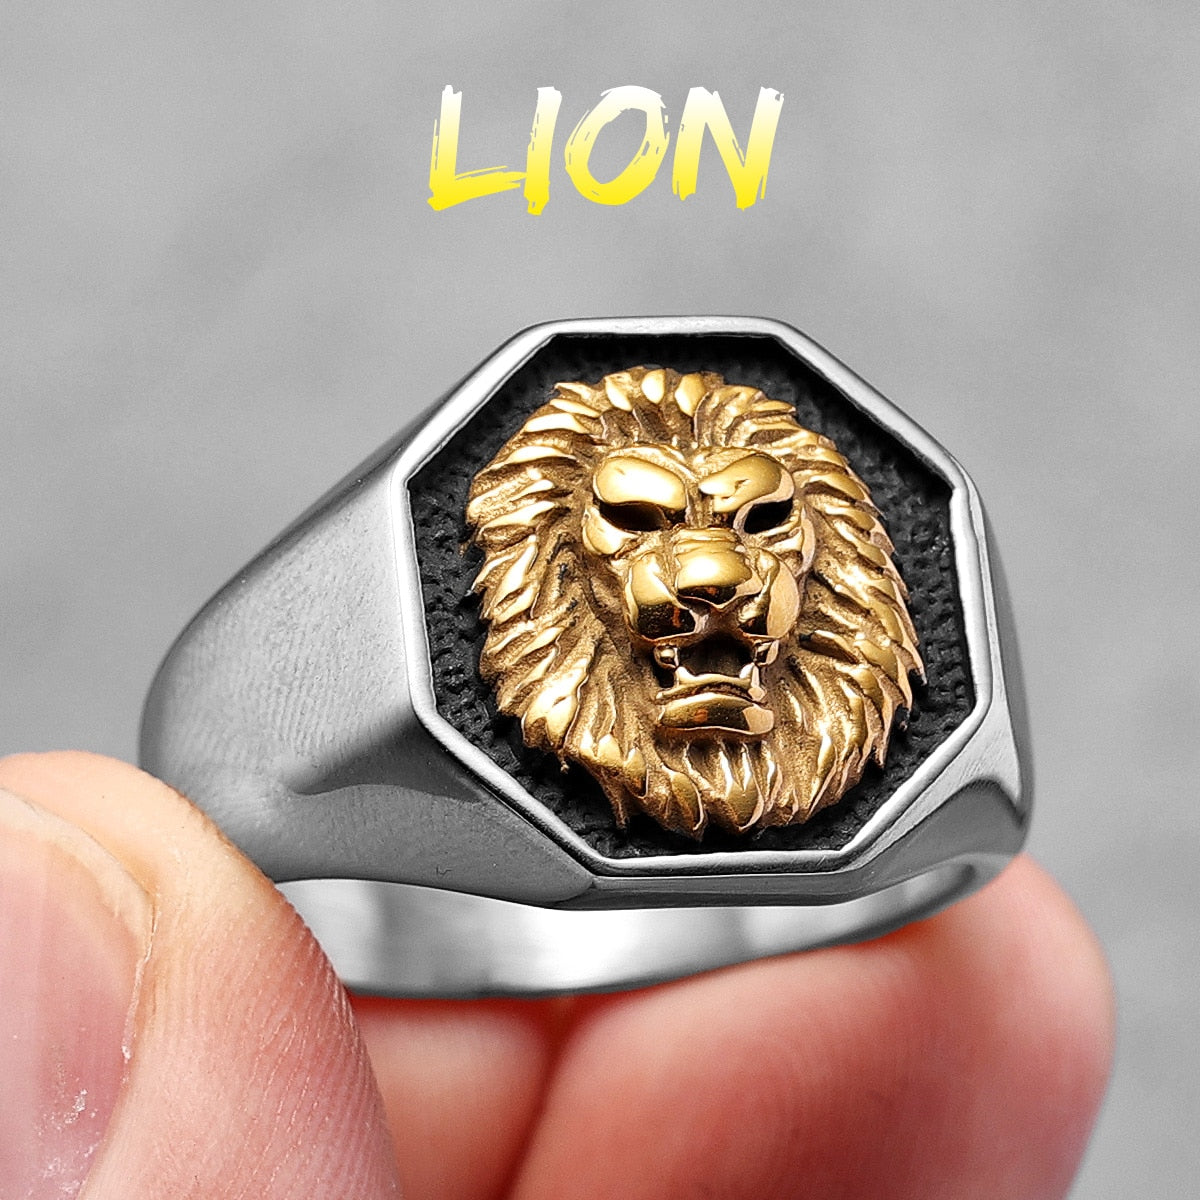 Lion King Animal Stainless Steel Mens Women's Rings Punk Trendy Unique for Couple Male Biker Jewelry Creativity Gift R760-Lion-SG